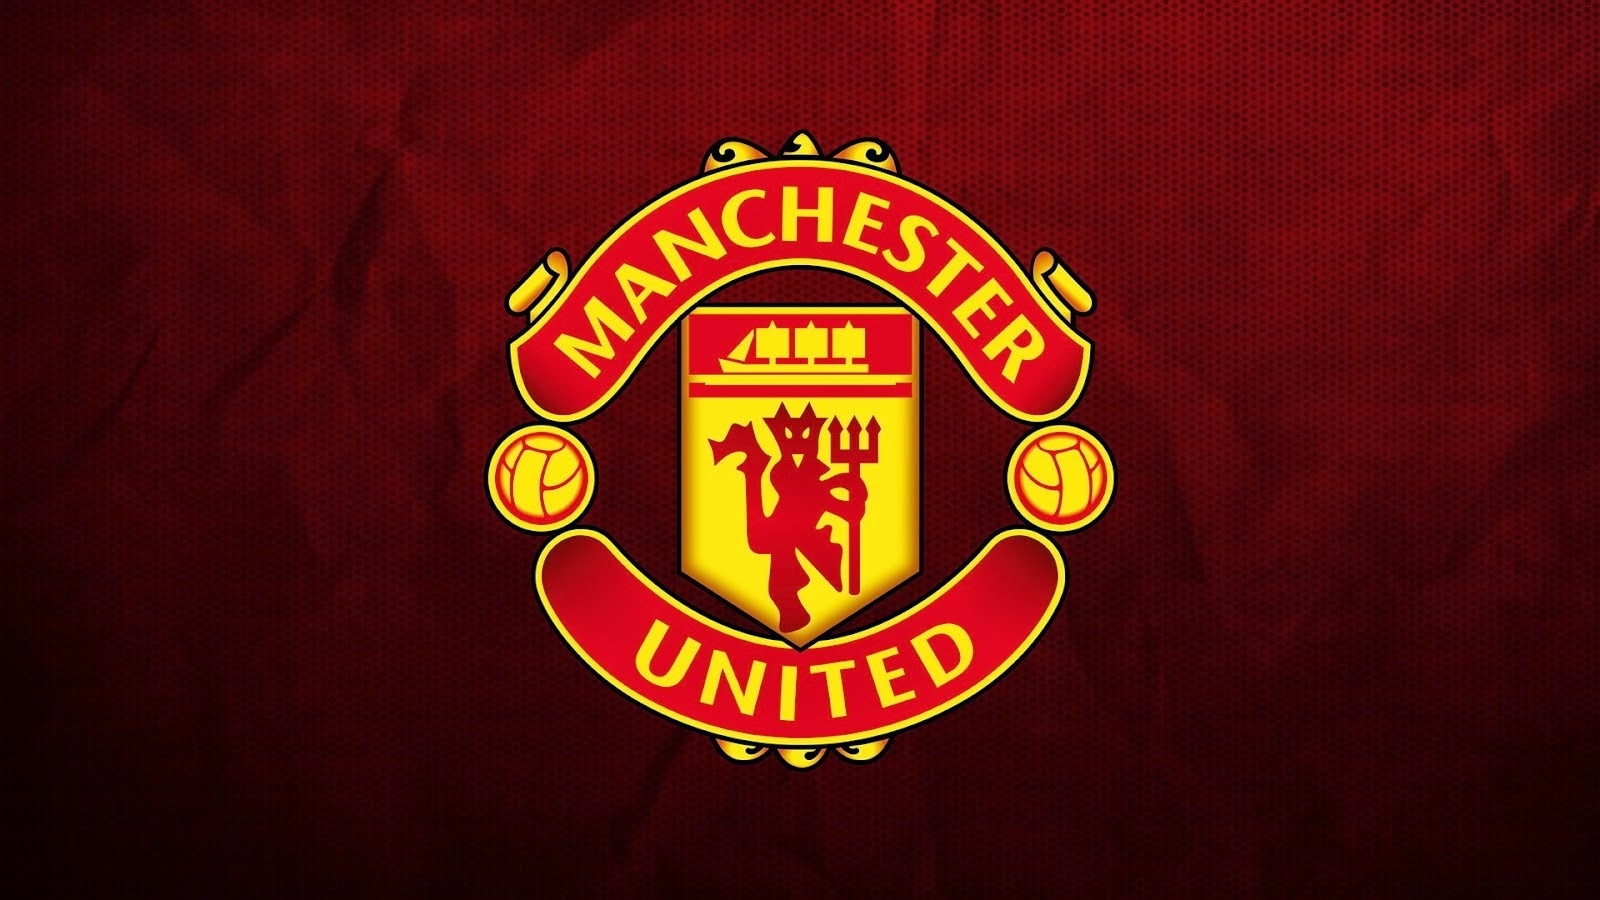 10 Best Man United Hd Wallpapers FULL HD 1080p For PC Background